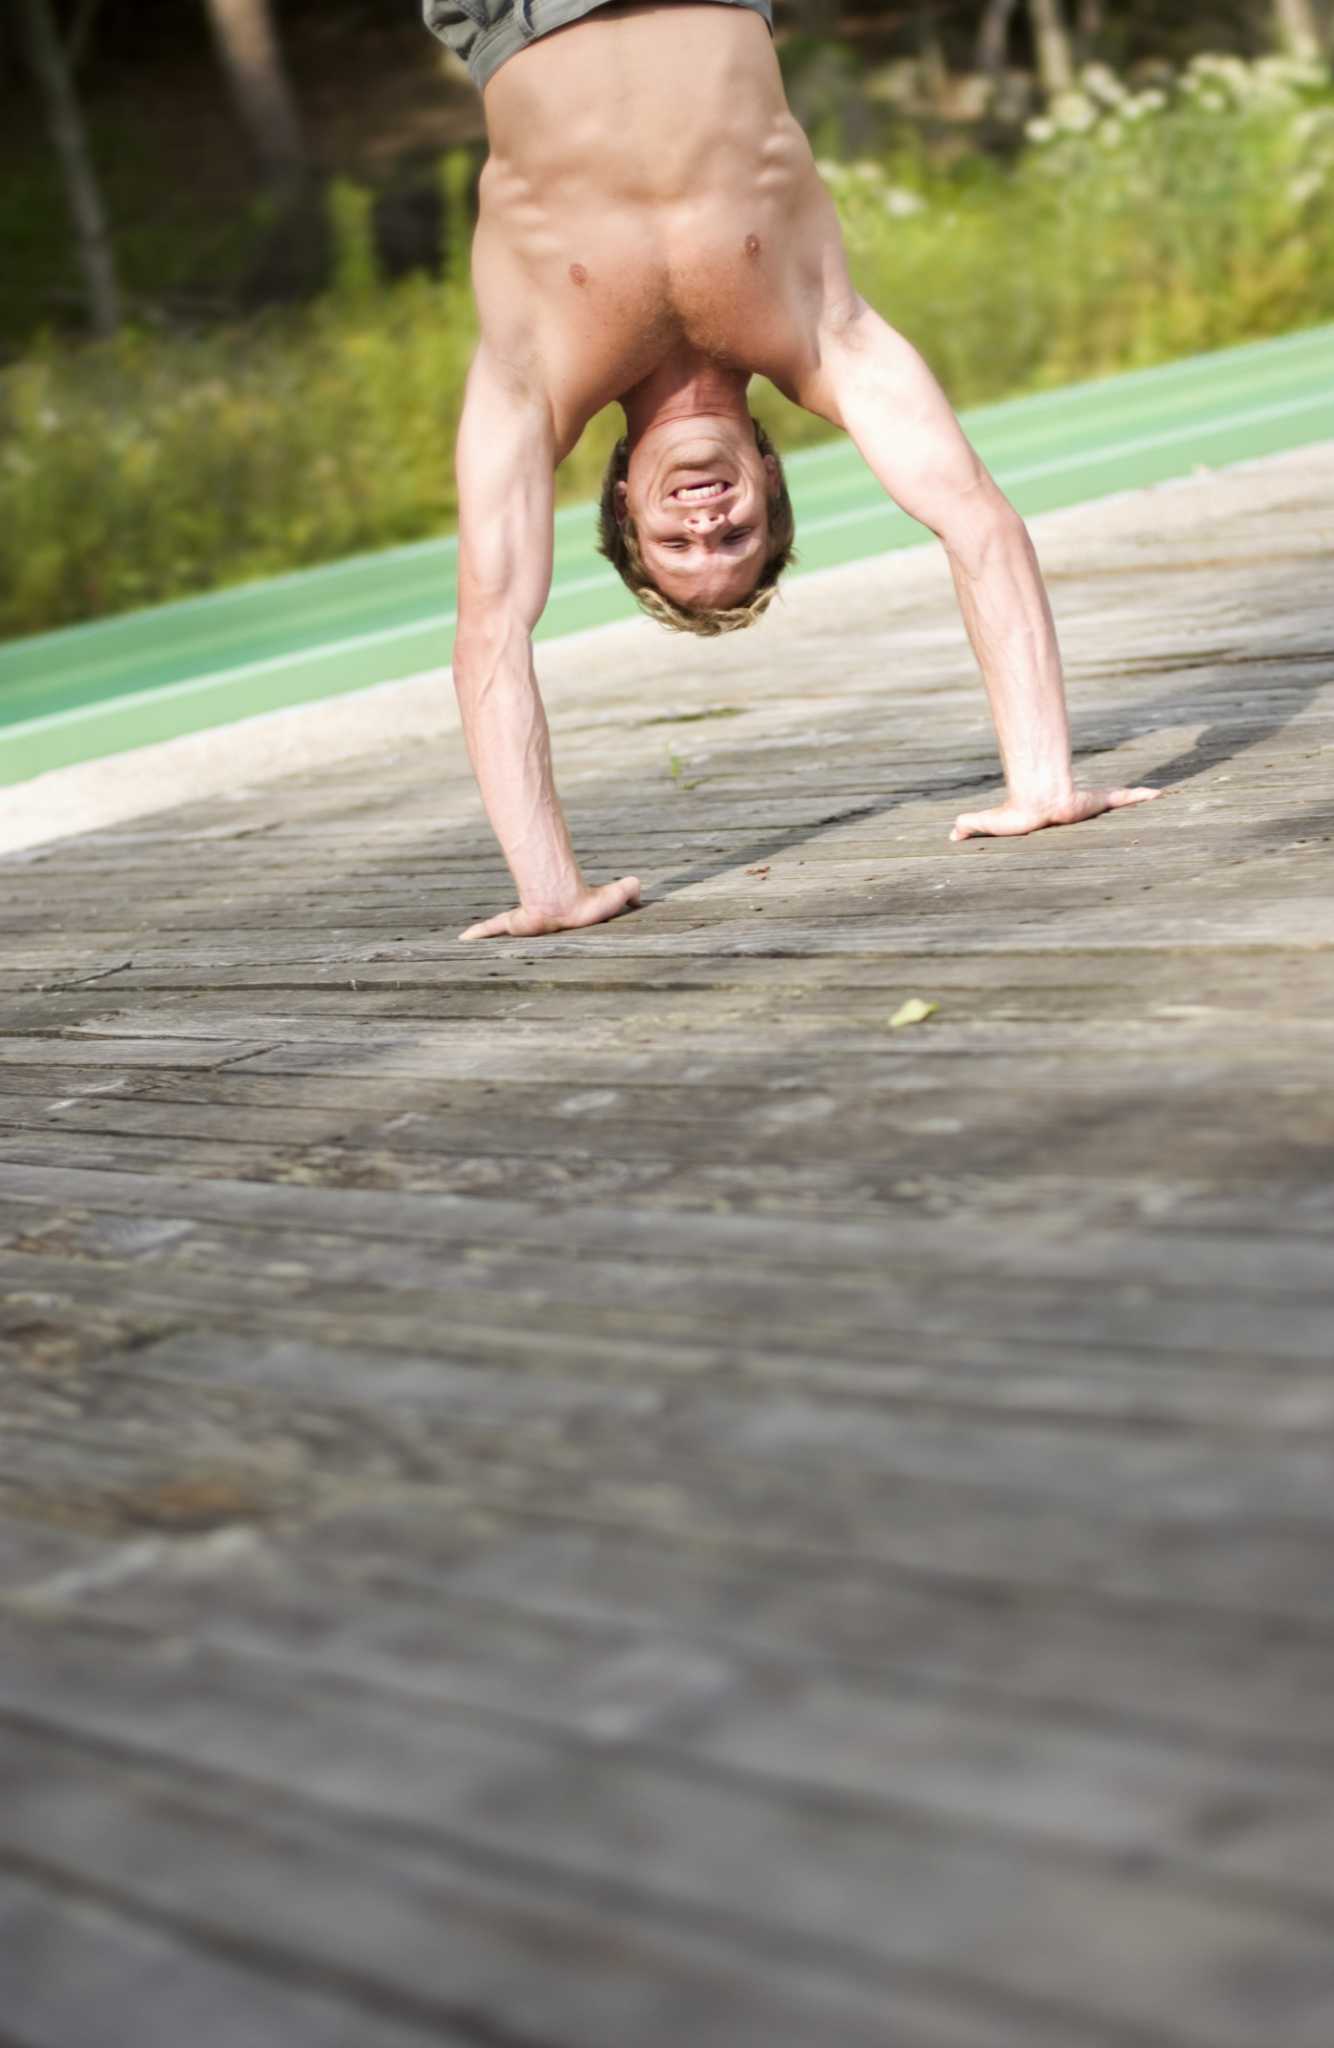 Handstand Push Ups: Why They Rock (And How to Start Doing Them)